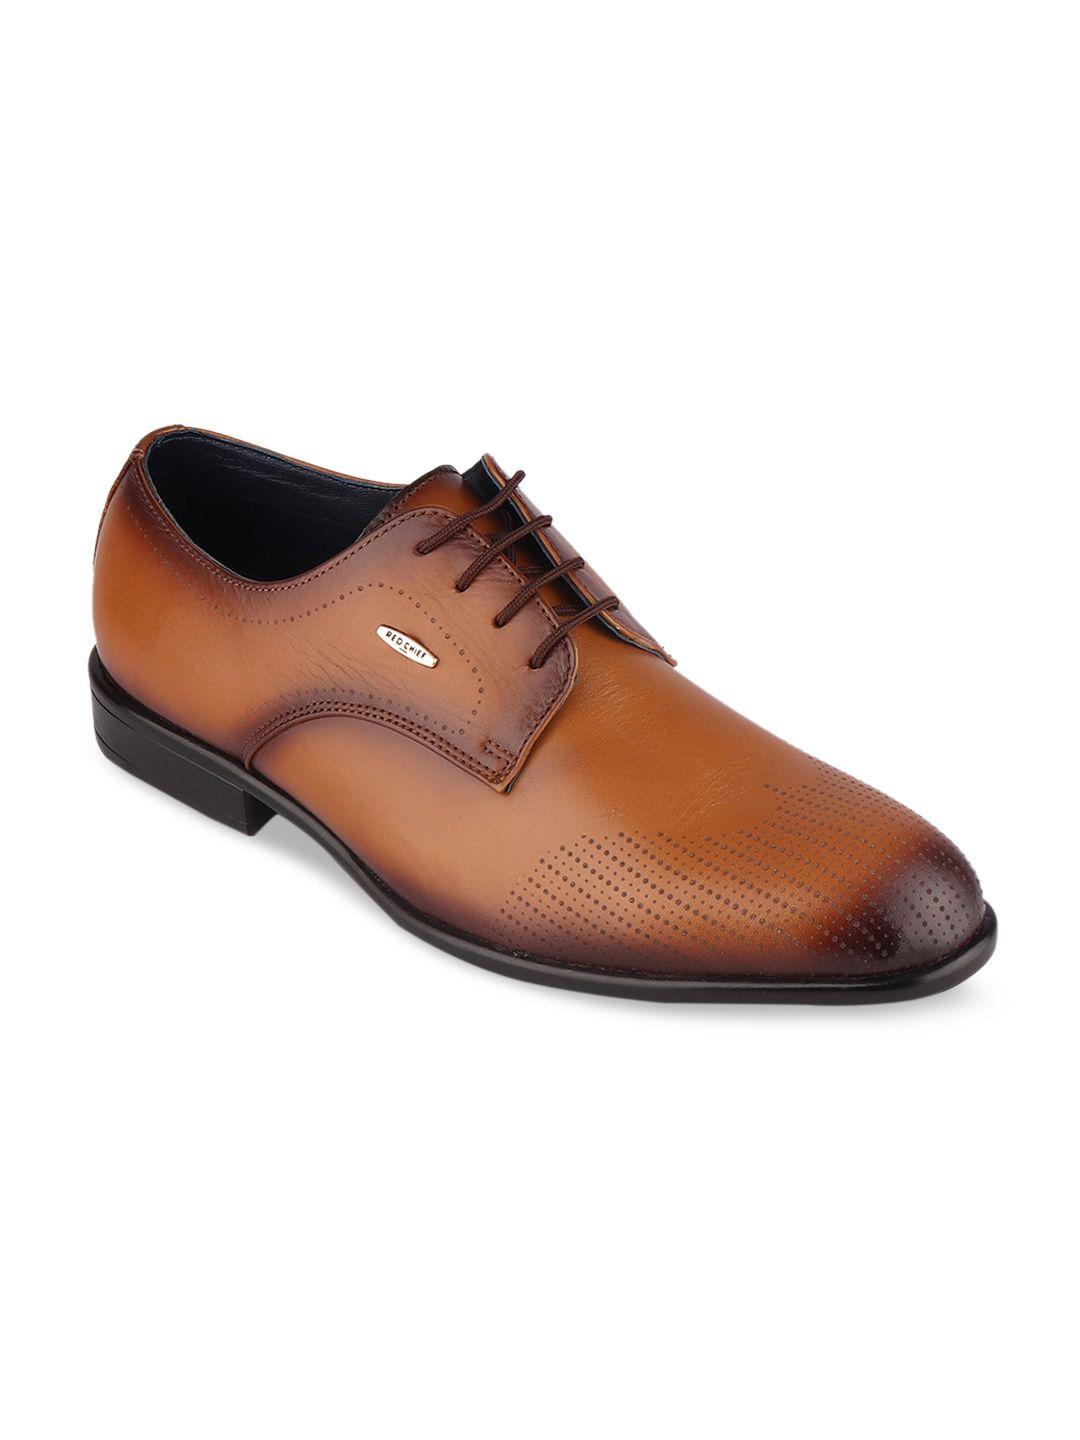 red-chief-men-tan-brown-textured-formal-oxford-shoes